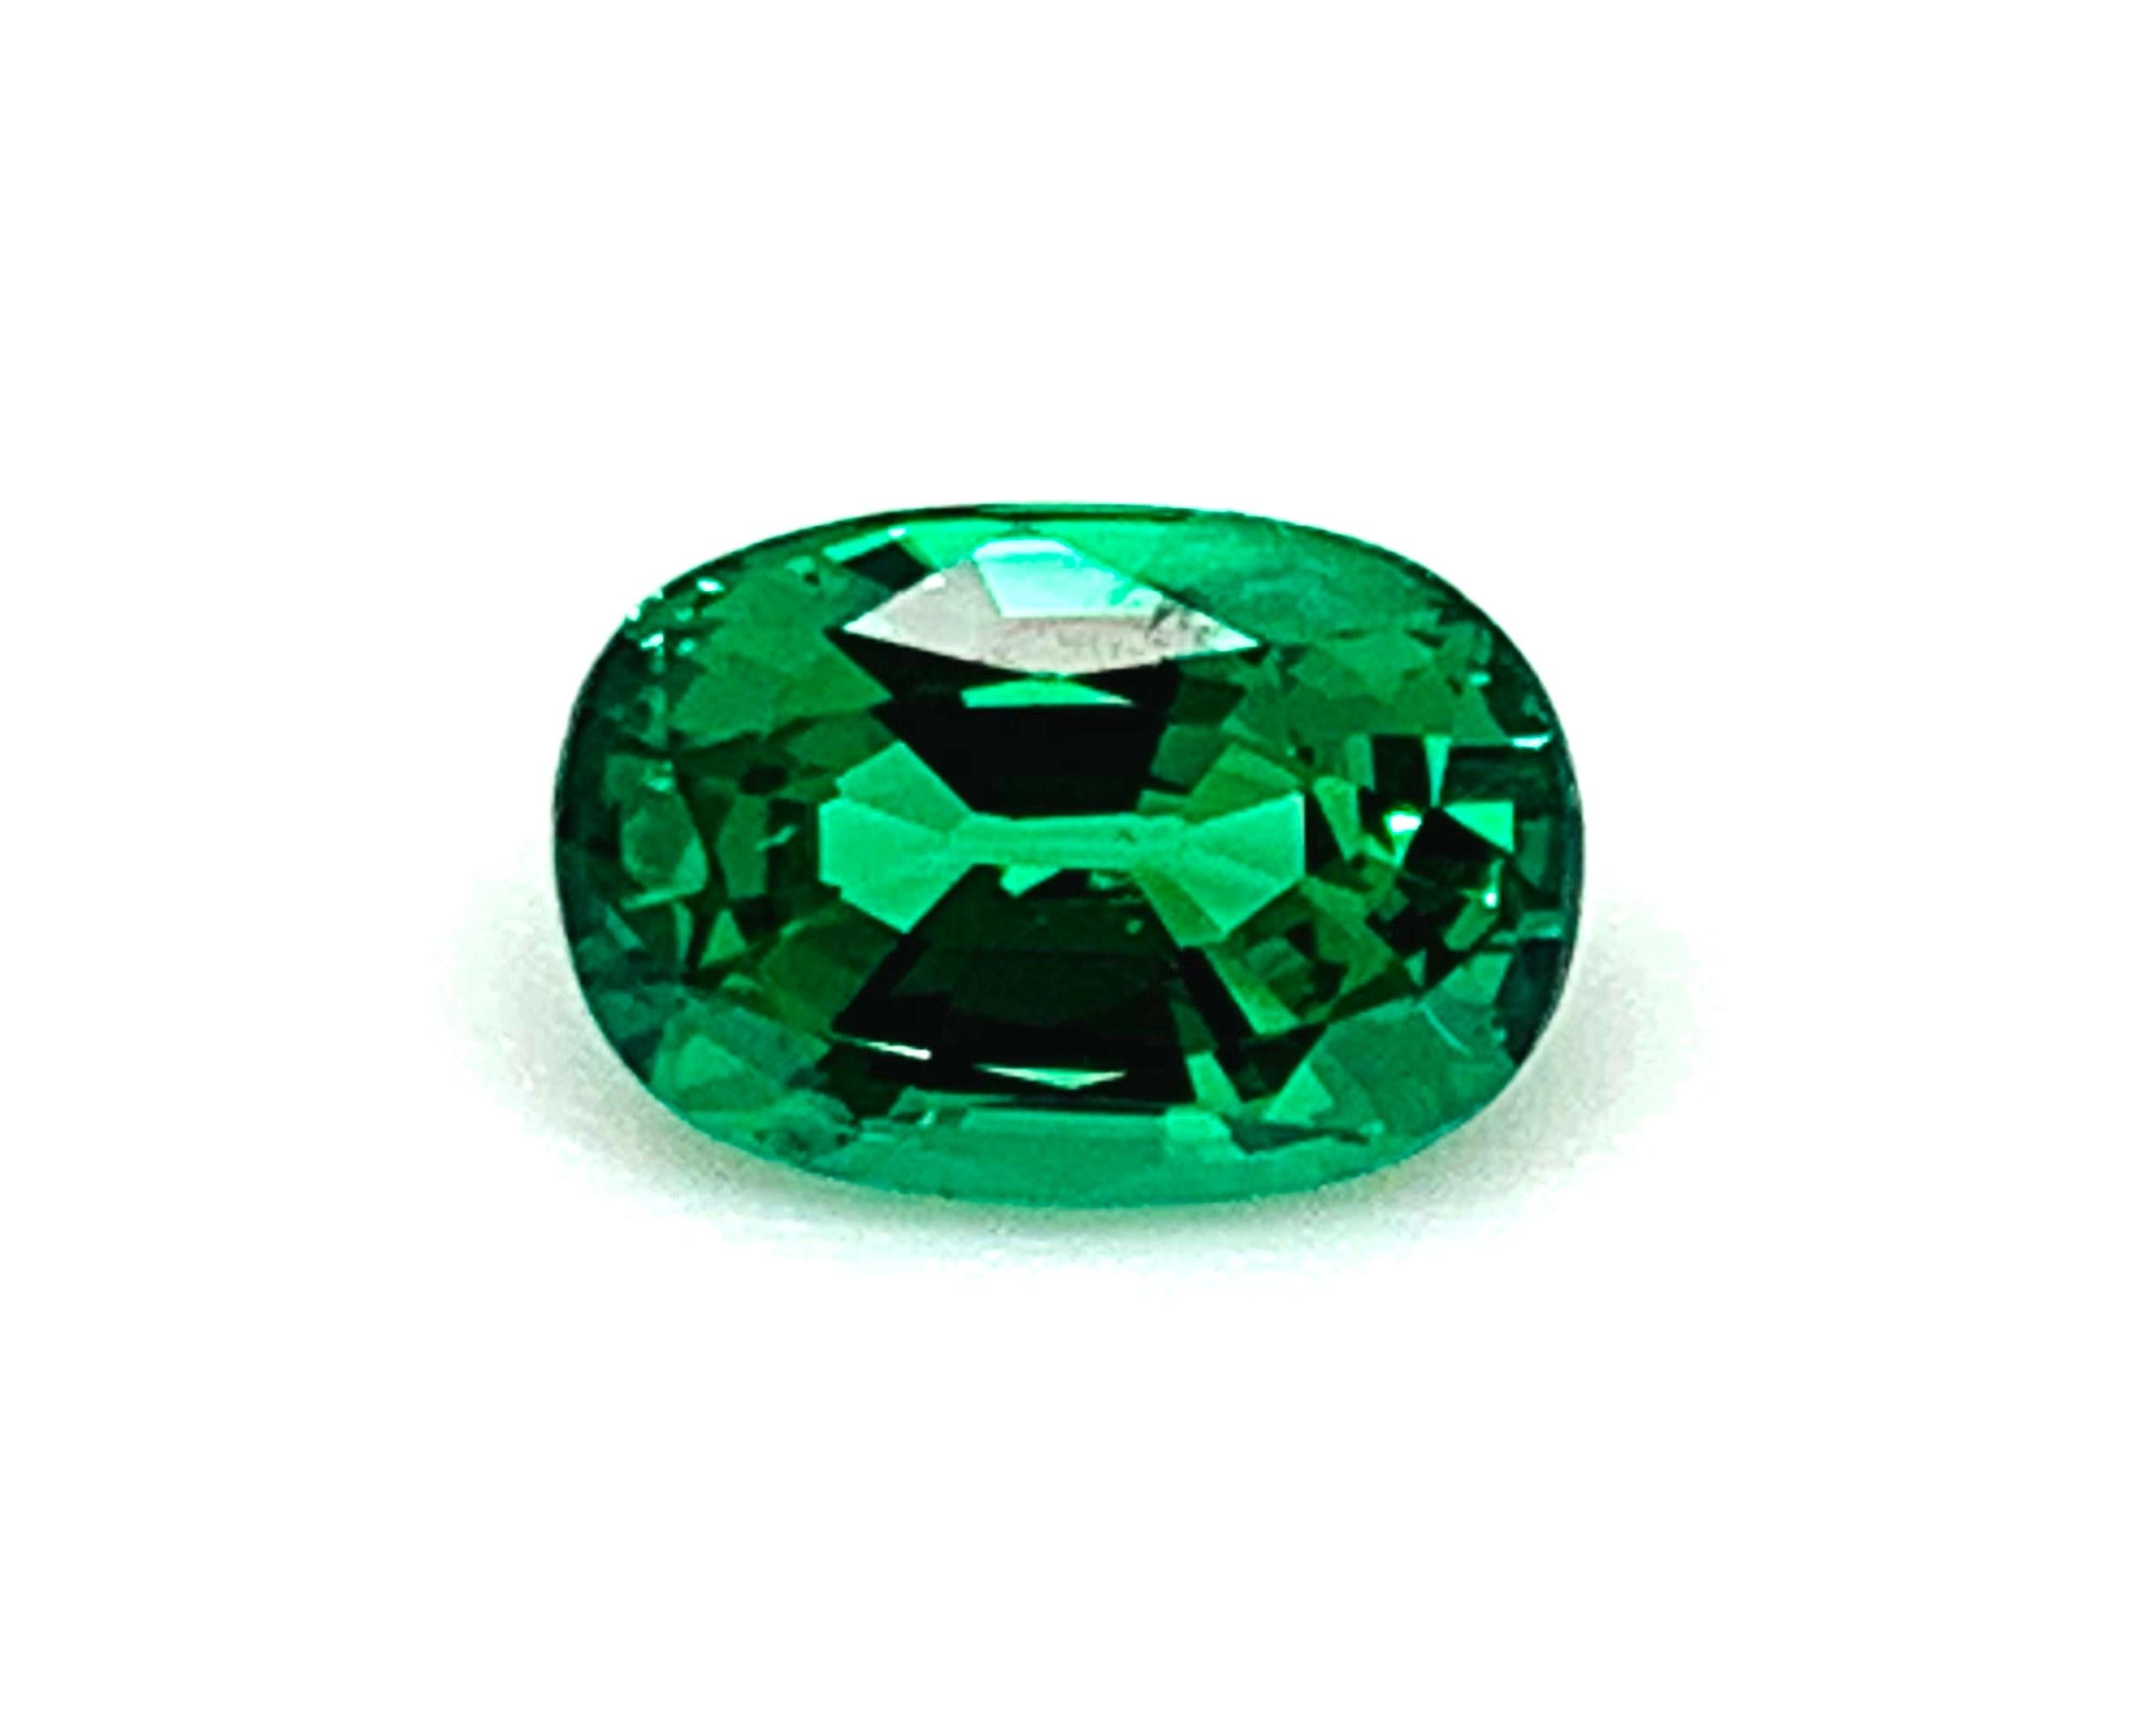 This tsavorite oval is an absolute gem! Whether you're looking for spring, summer, or holiday green, no other gemstone seems to capture the perfect shade of green for all seasons the way tsavorite garnets can. This gemstone is a stunning shade of